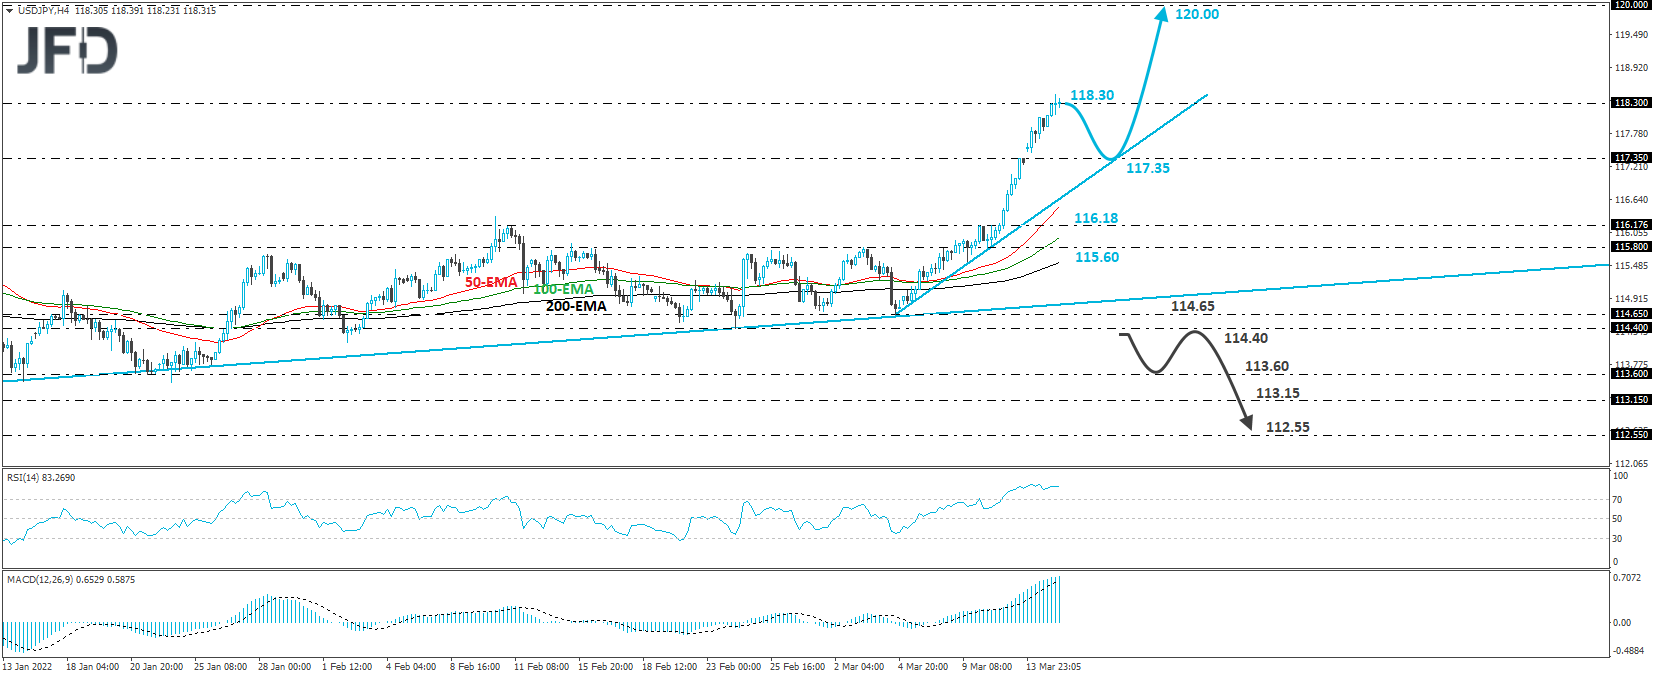 USD/JPY 4-hour chart technical analysis.